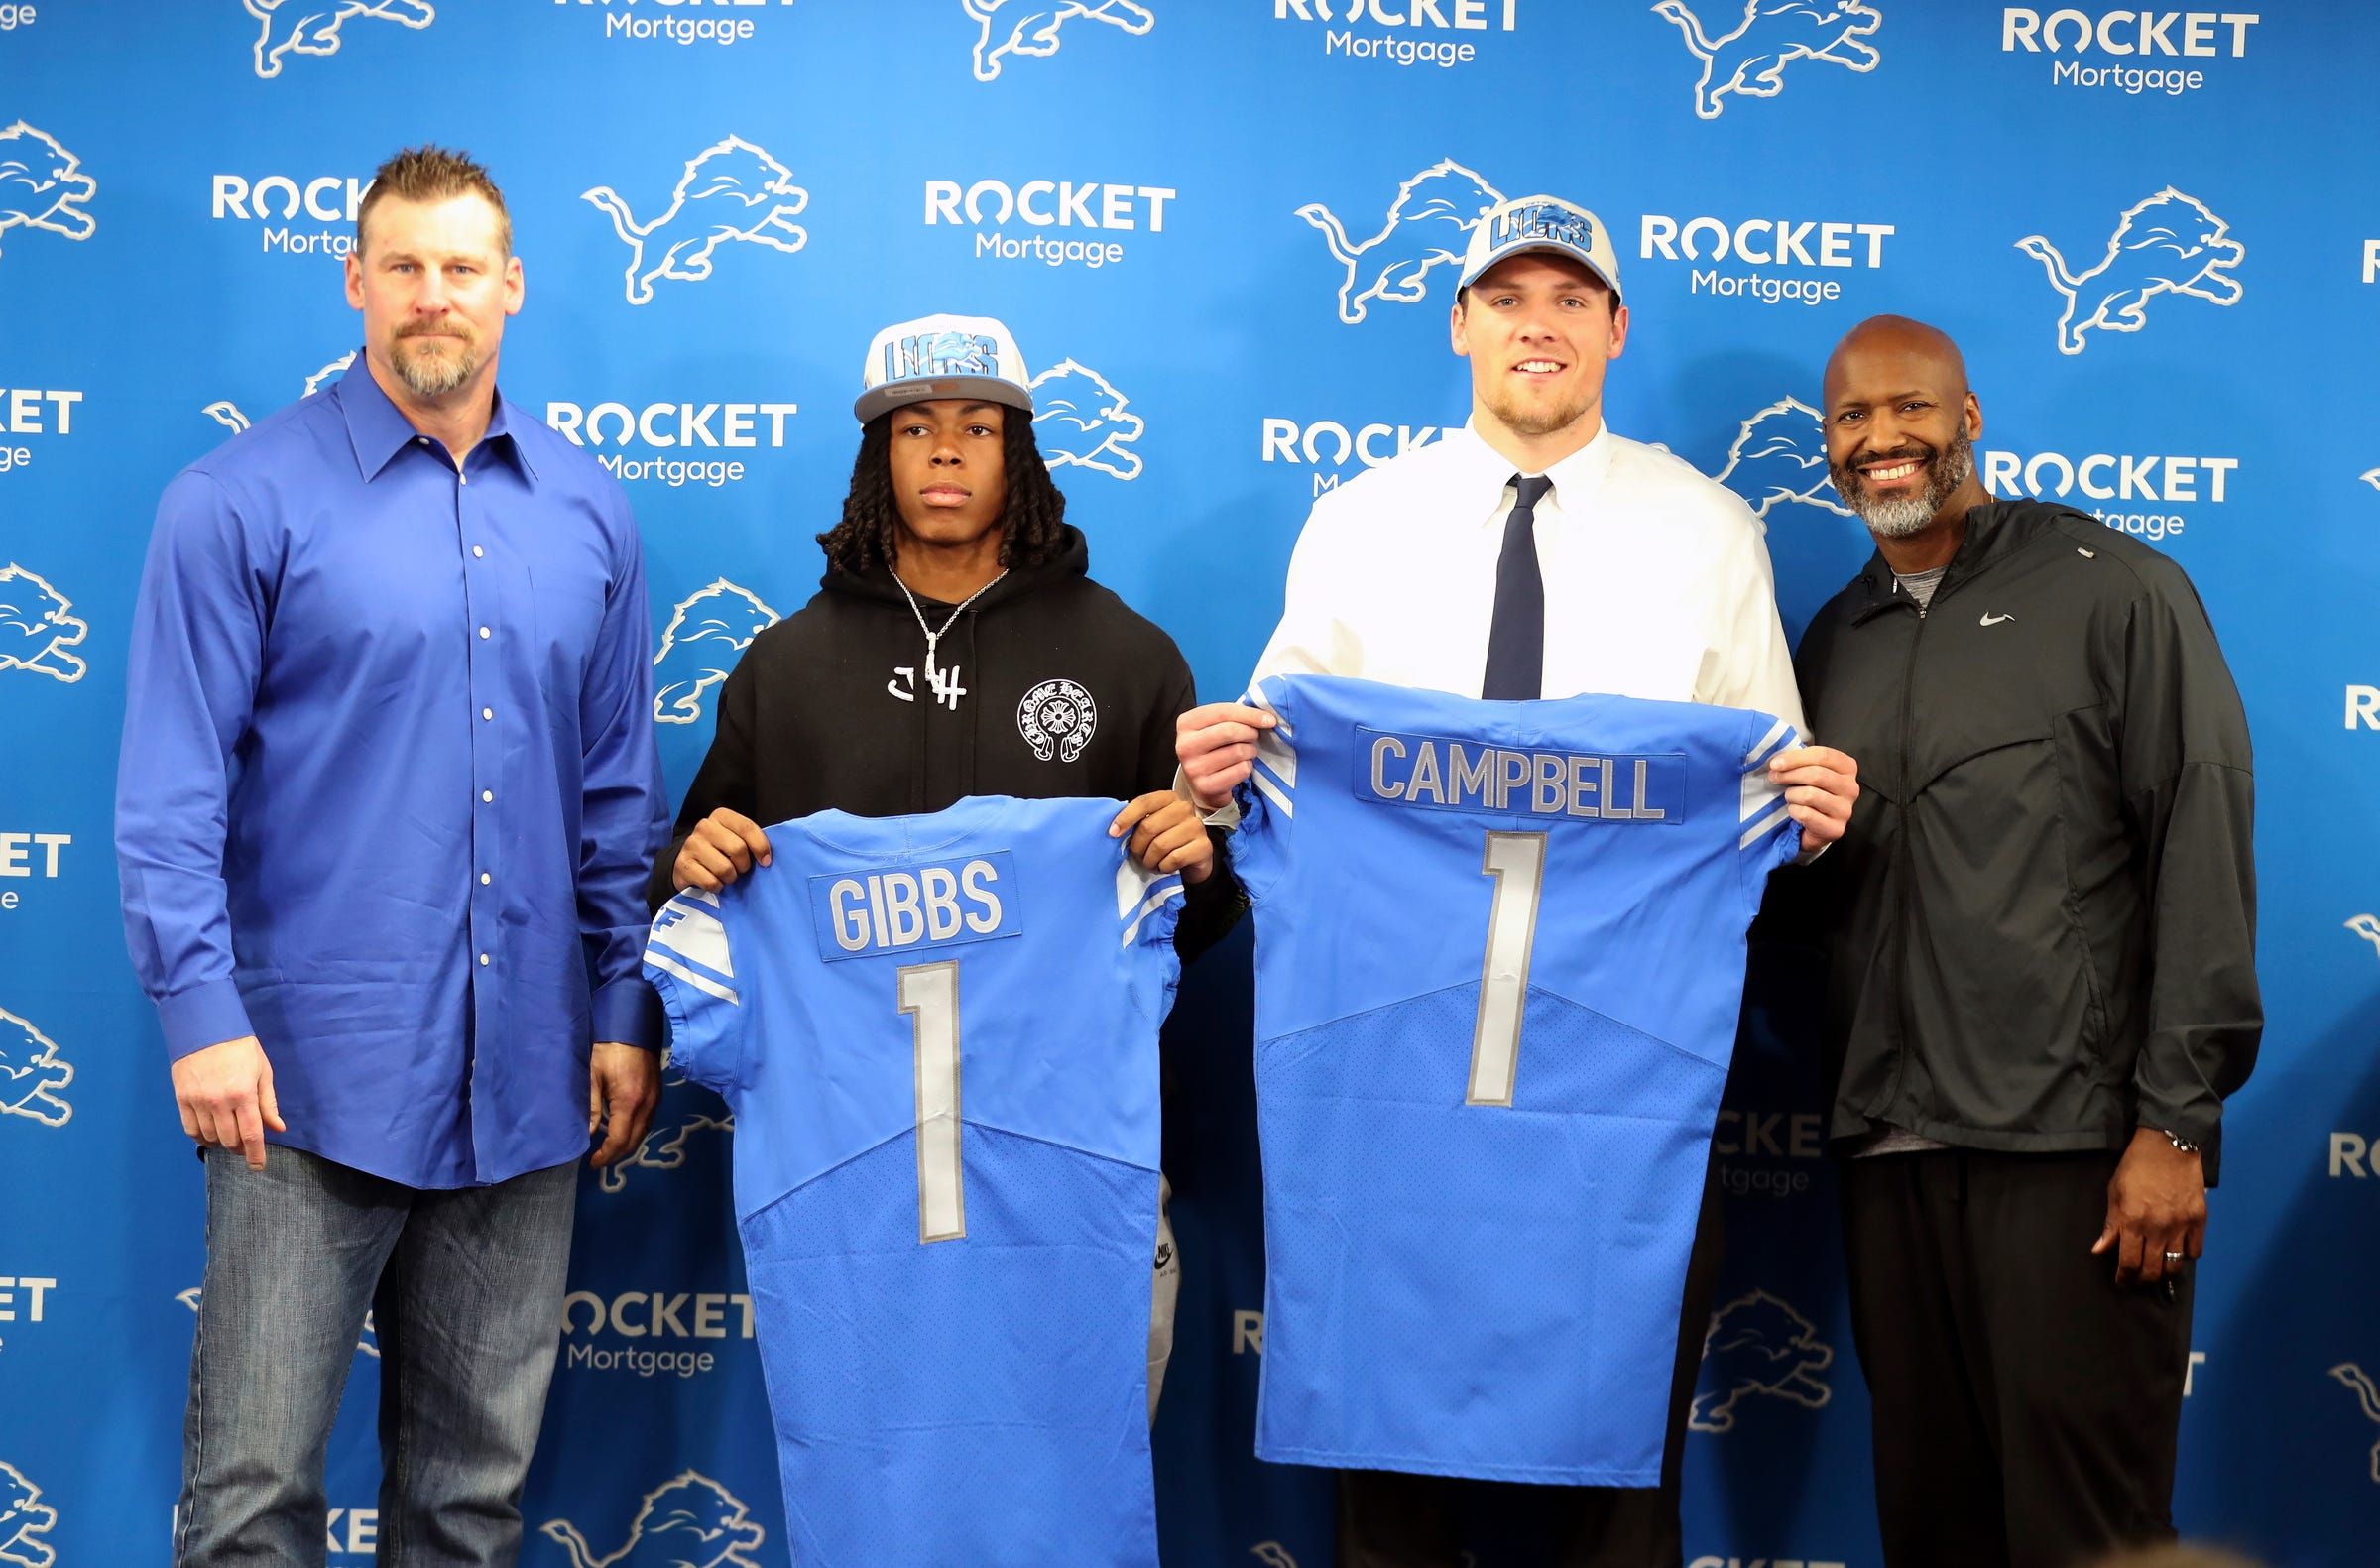 Presenting the Detroit Lions draft class of 2023